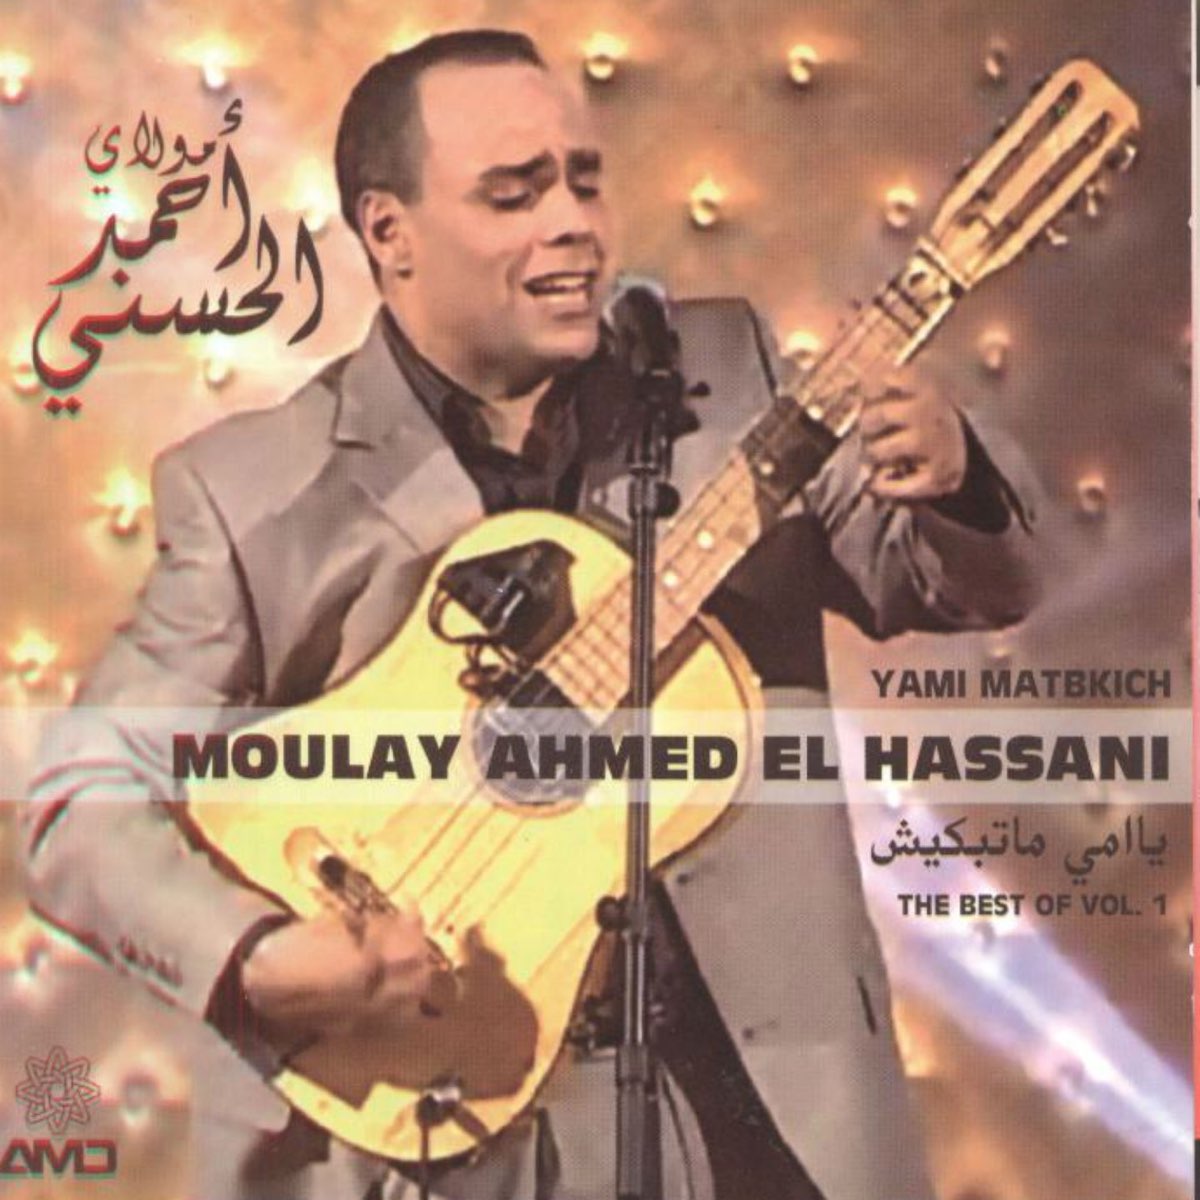 The Best of Moulay Ahmed El Hassani, Vol. 1: Yami Matbkich - Album par Moulay  Ahmed El Hassani - Apple Music